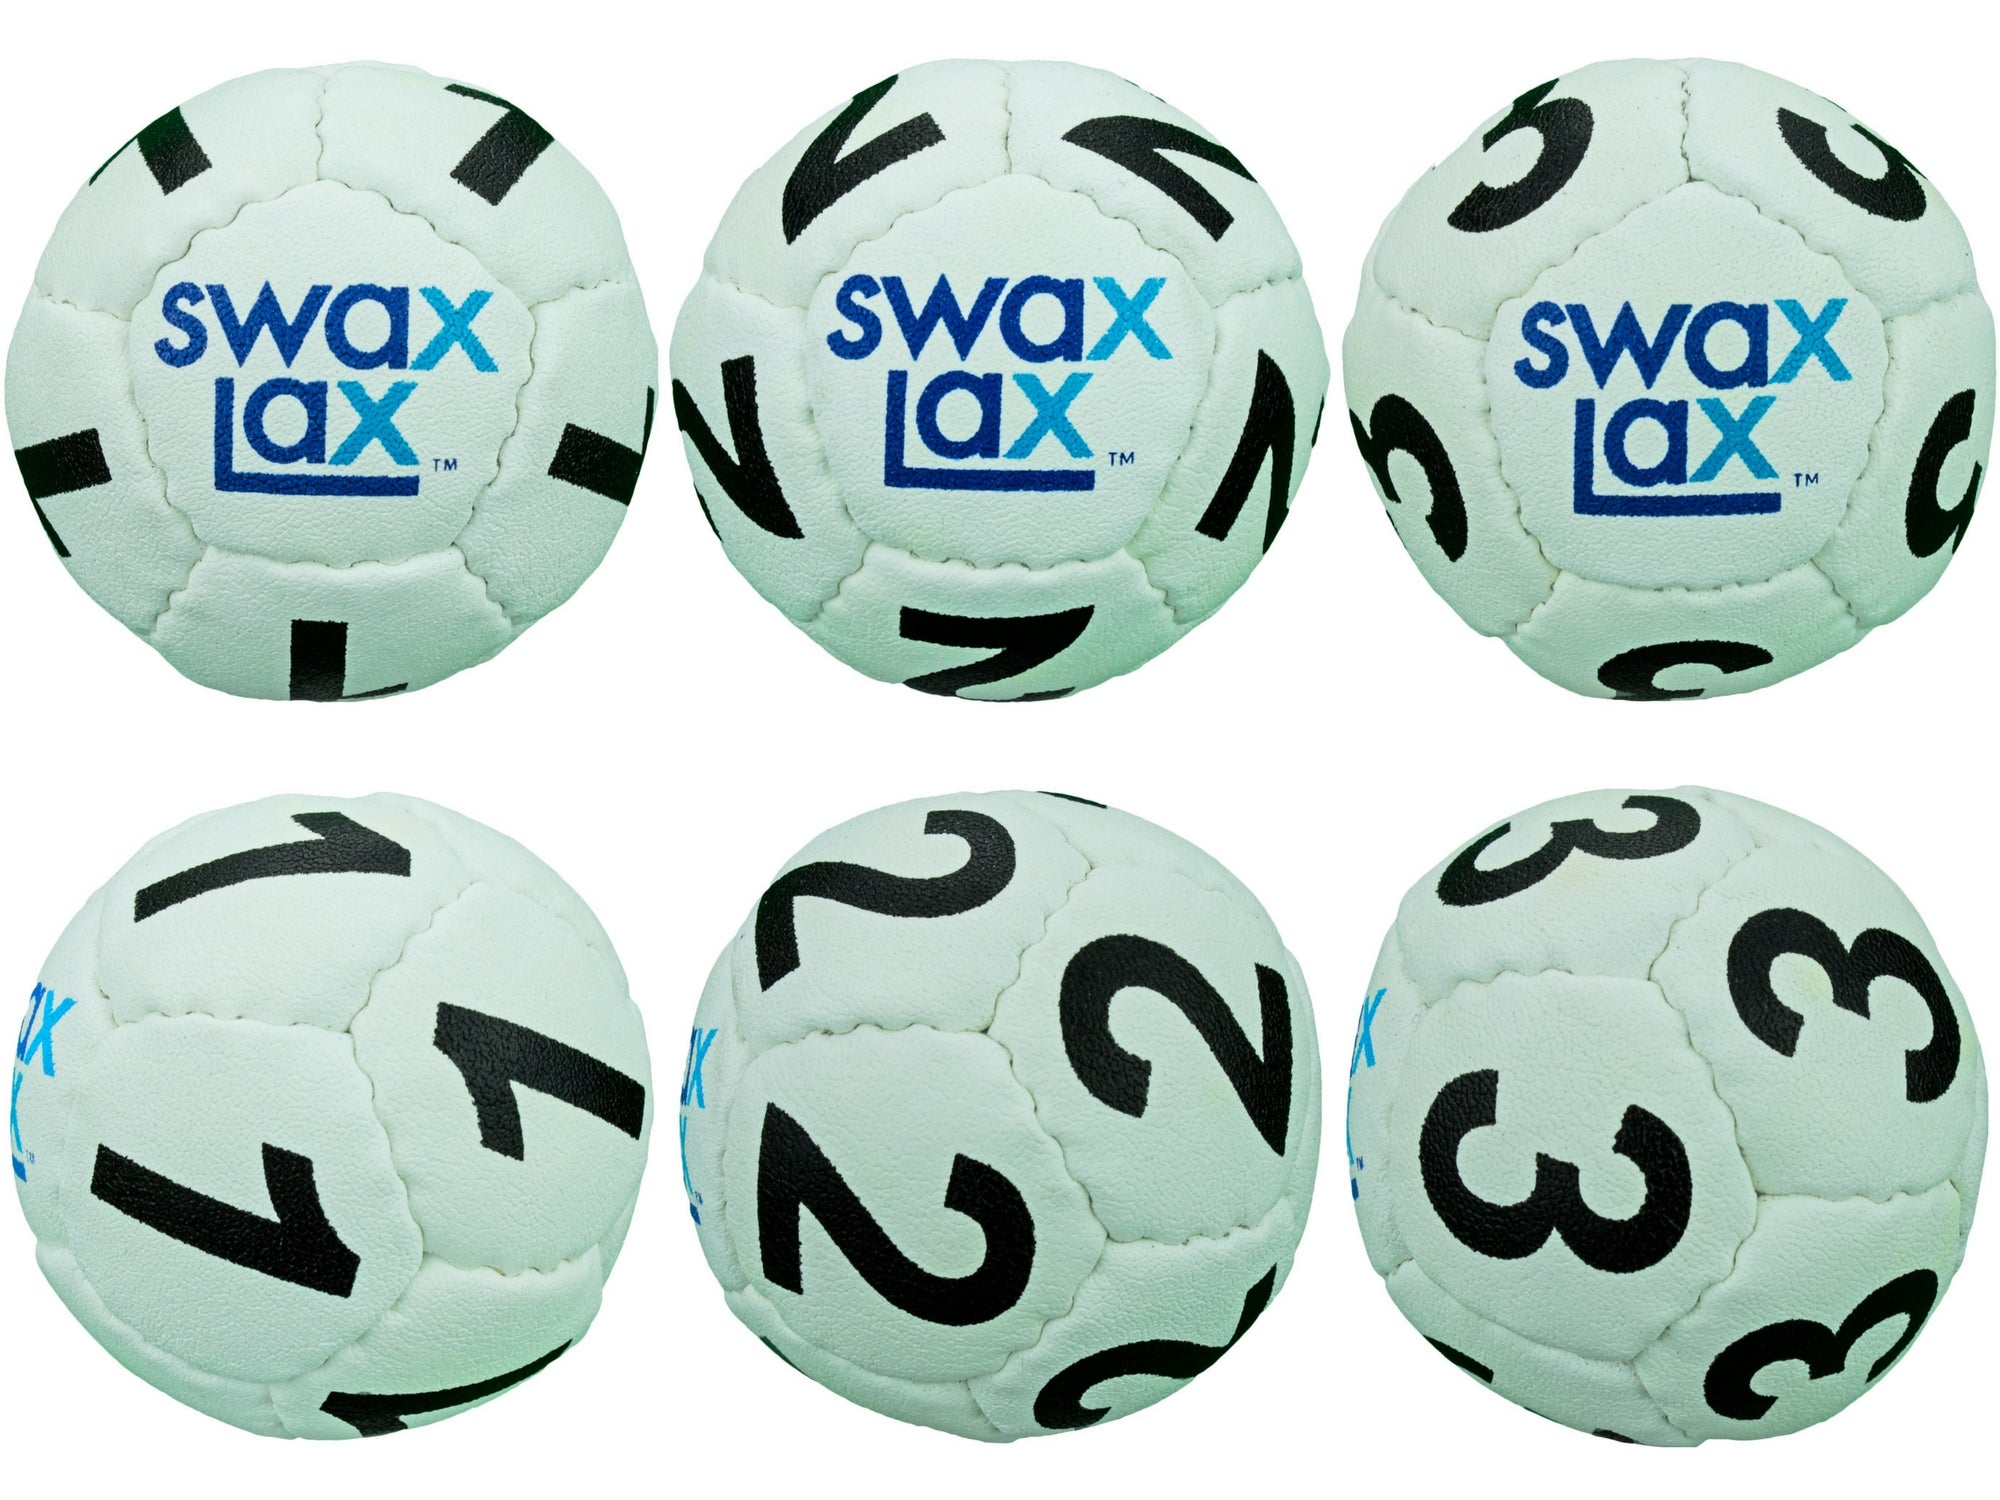 White Swax Lax Lacrosse Goalie Training Balls, Numbers 1-3 - front AND side views of set